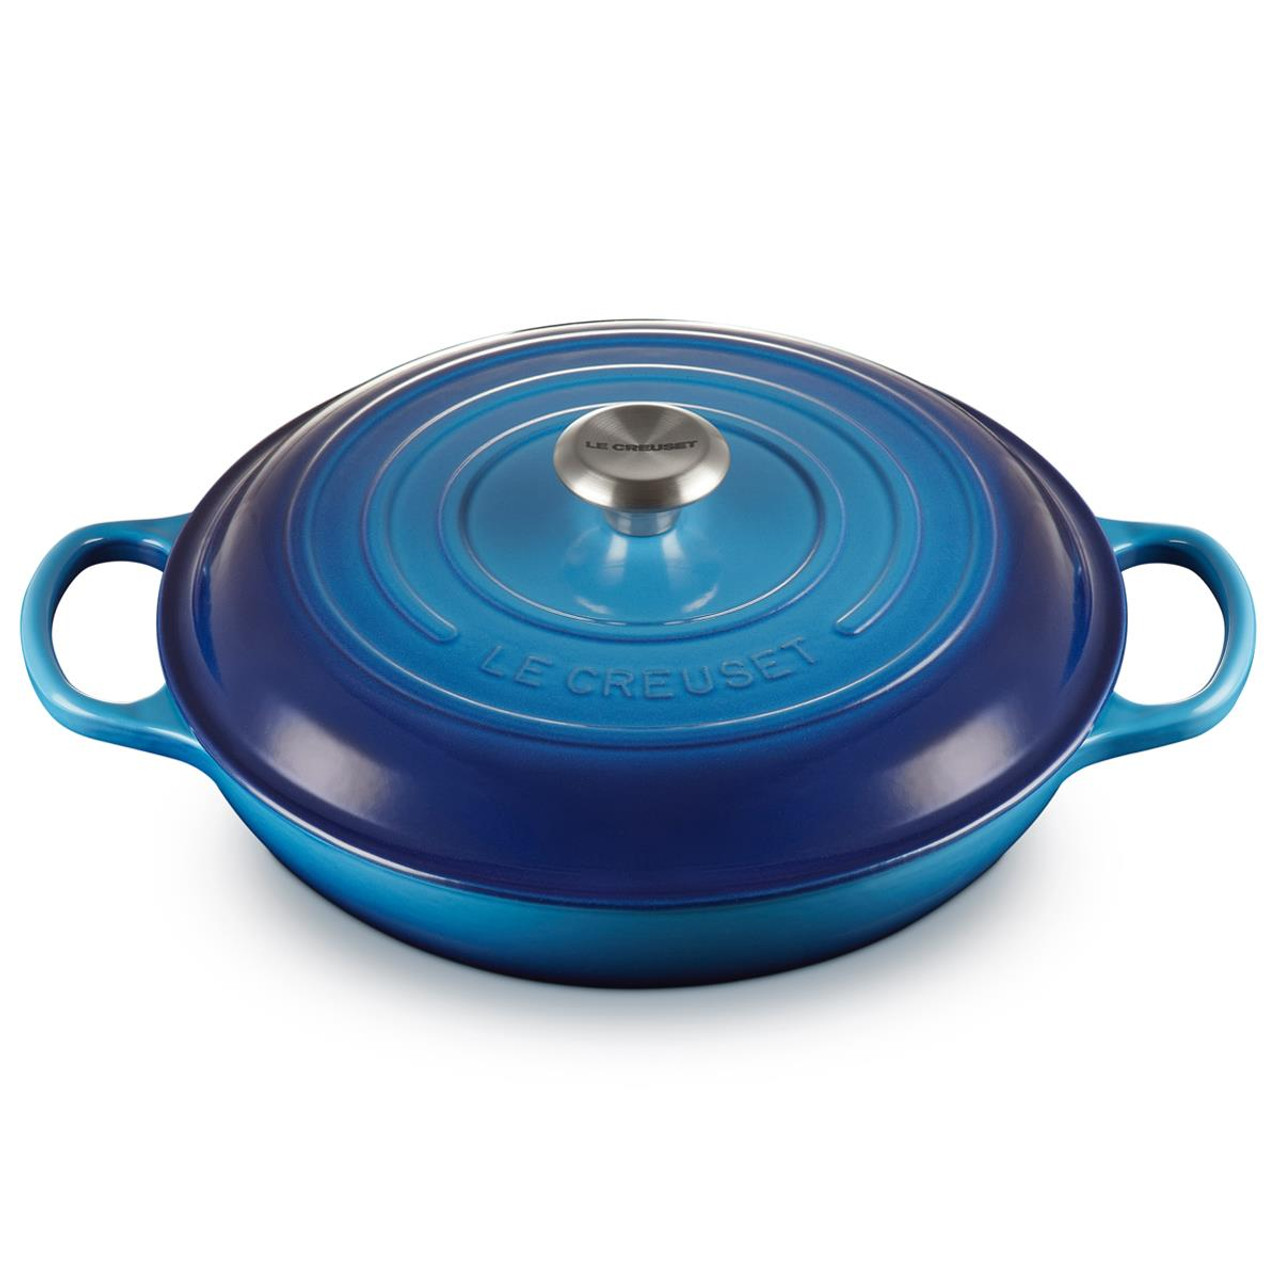 What is the difference between a deep and shallow casserole dish?